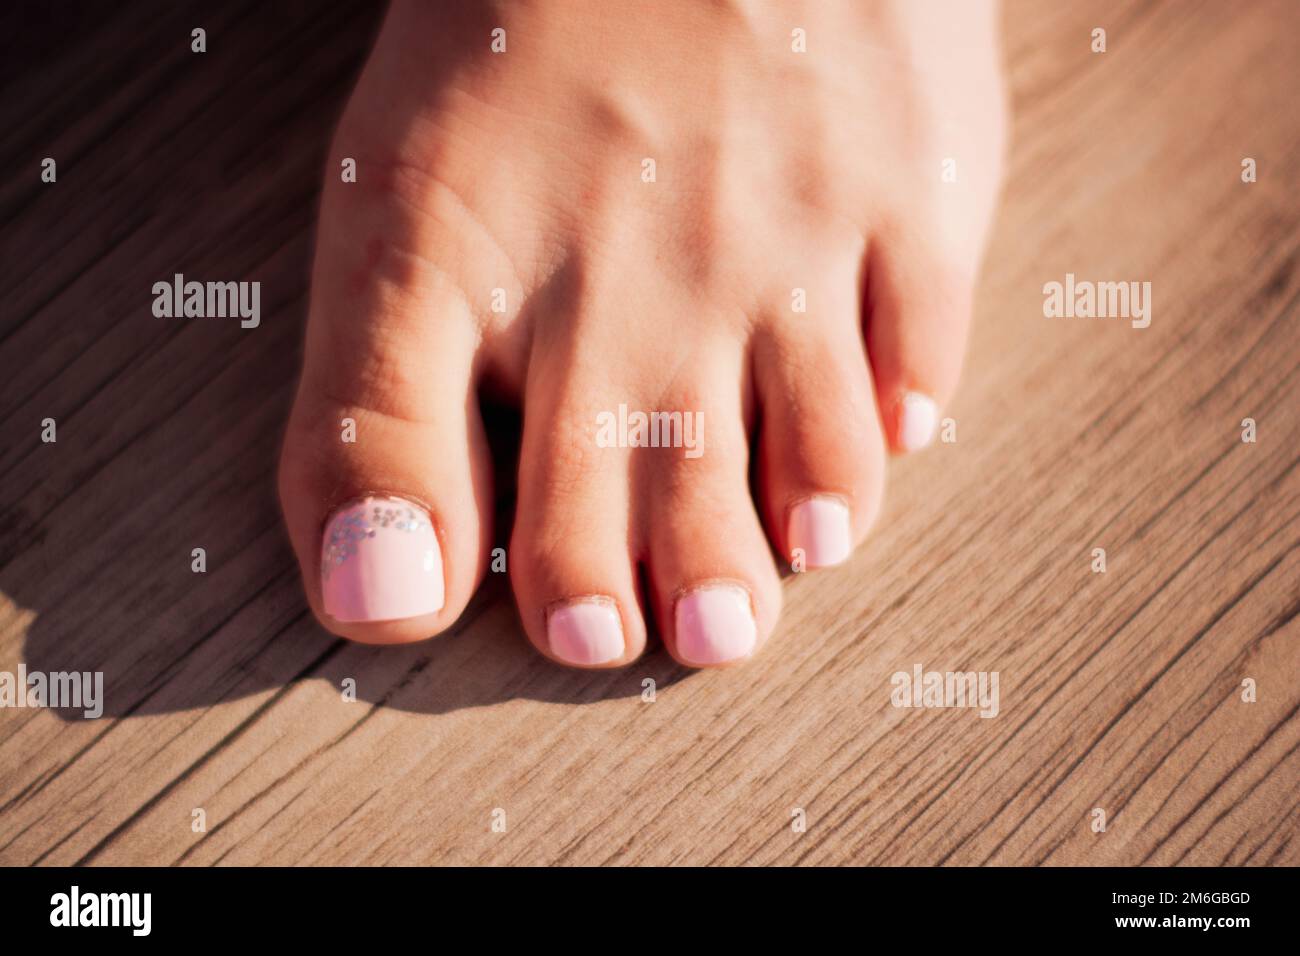 Unusual human toes. Two toes are joined together Stock Photo